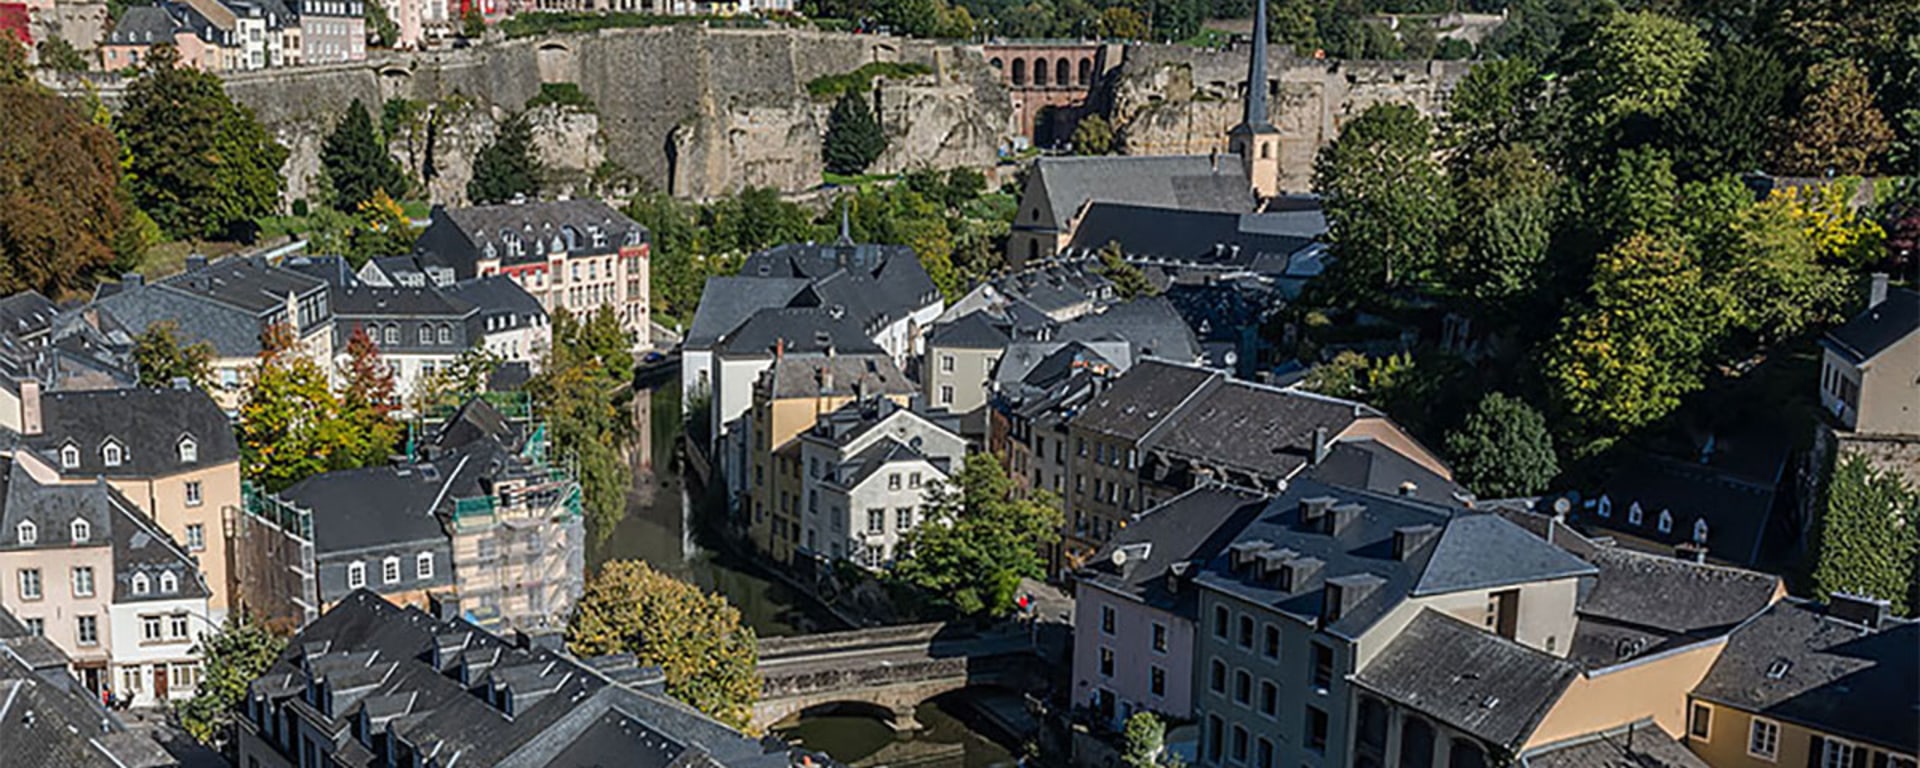 Vontobel in Luxembourg - View over the city of Luxembourg